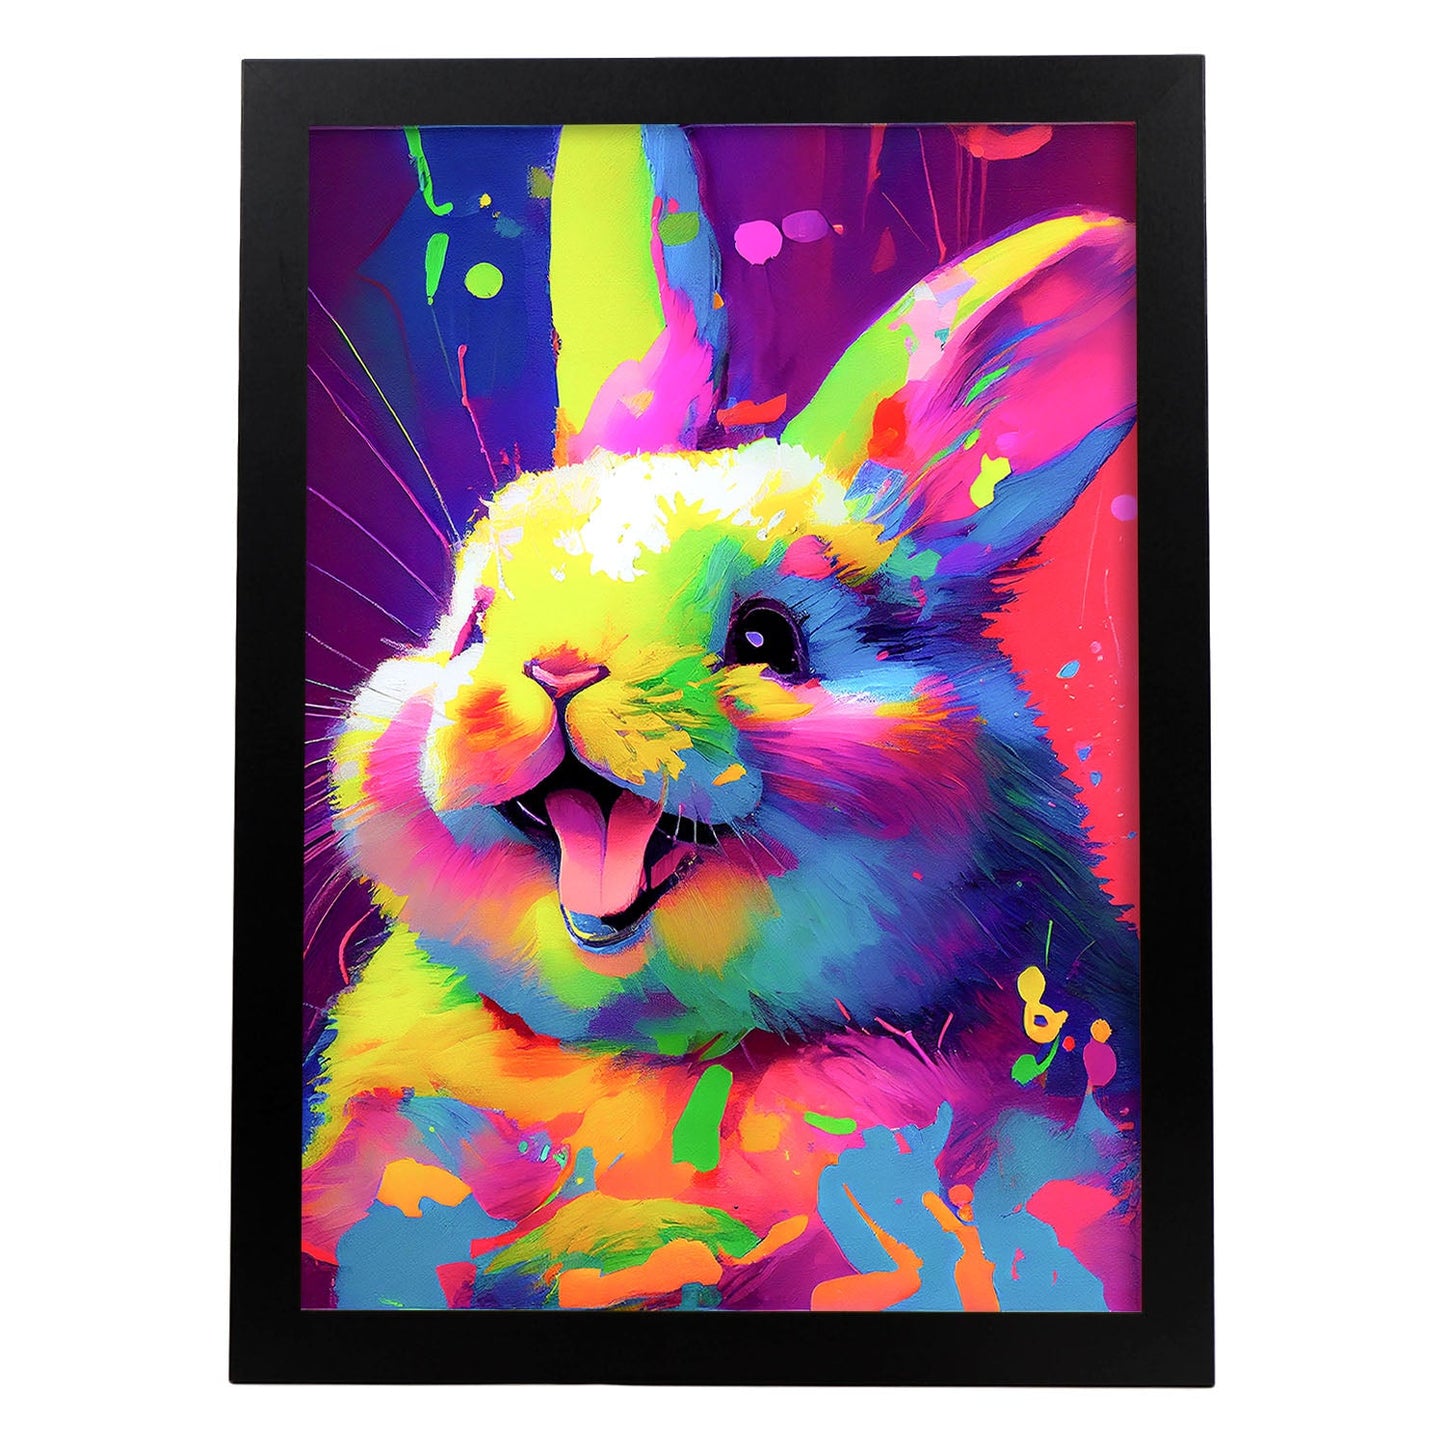 Nacnic Abstract smiling Bunny in Lisa Fran Style. Aesthetic Wall Art Prints for Bedroom or Living Room Design.